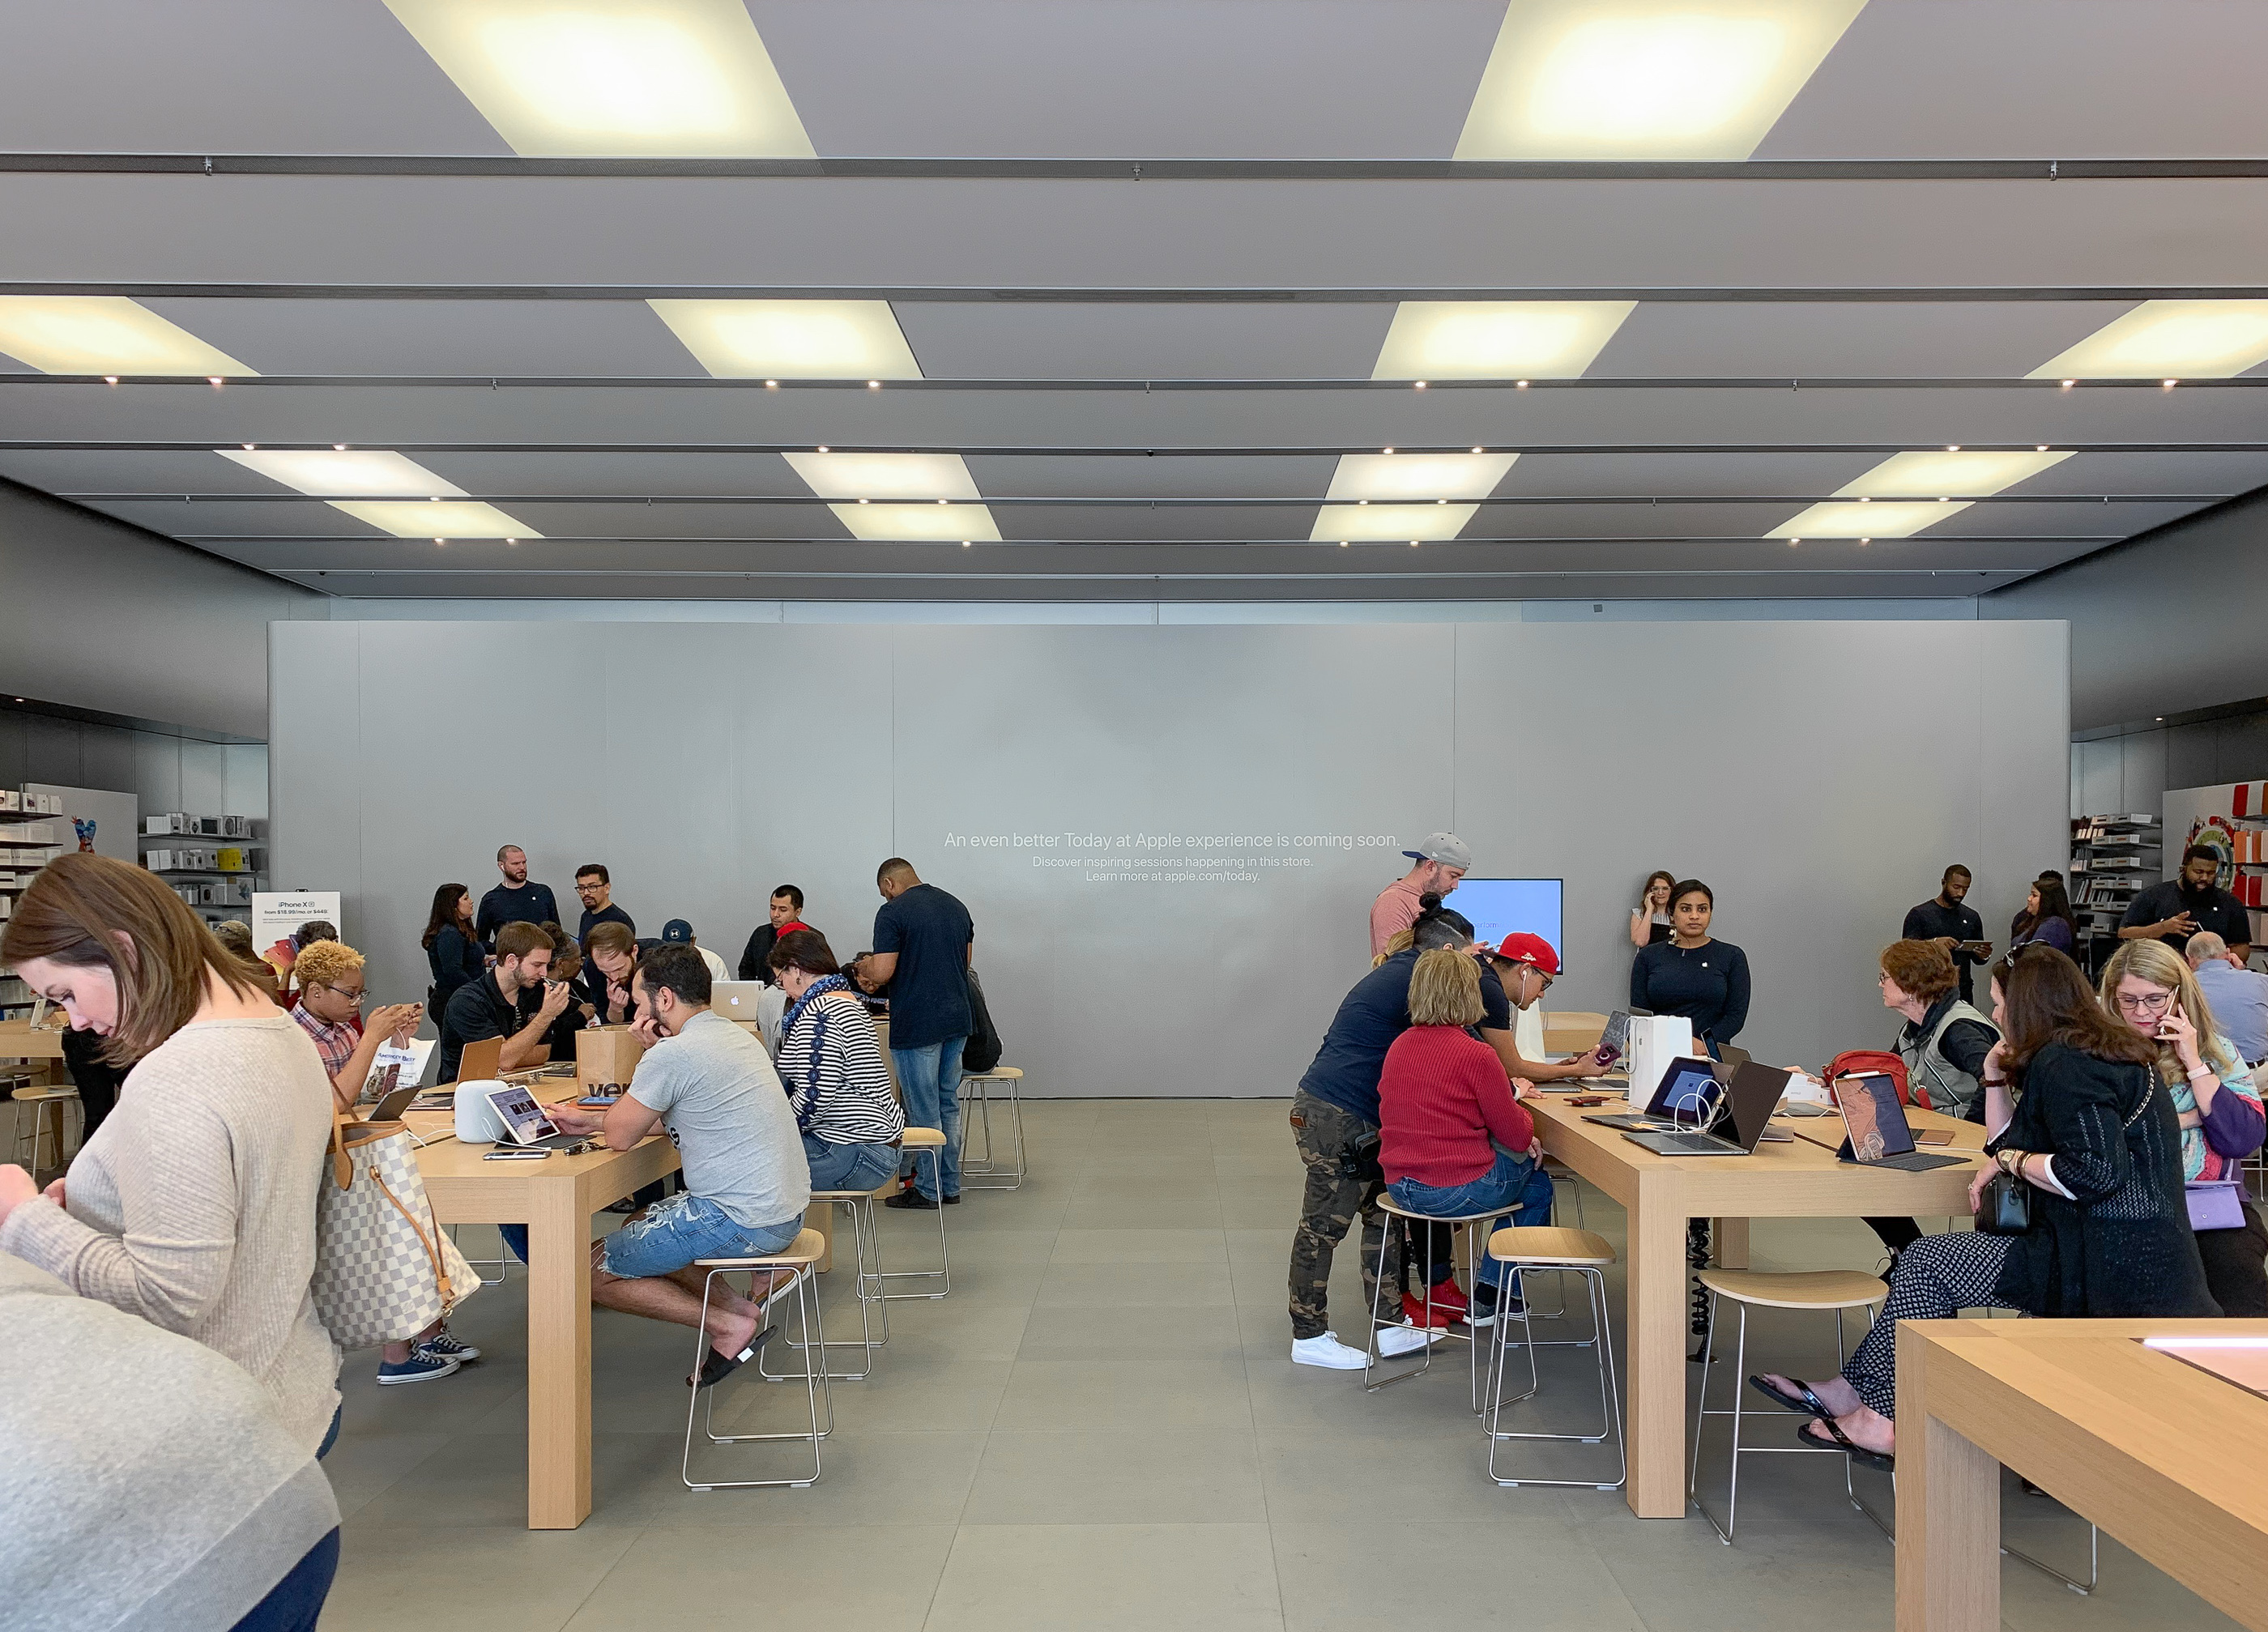 Apple Store Opening: Ridge Hill - Yonkers, NY